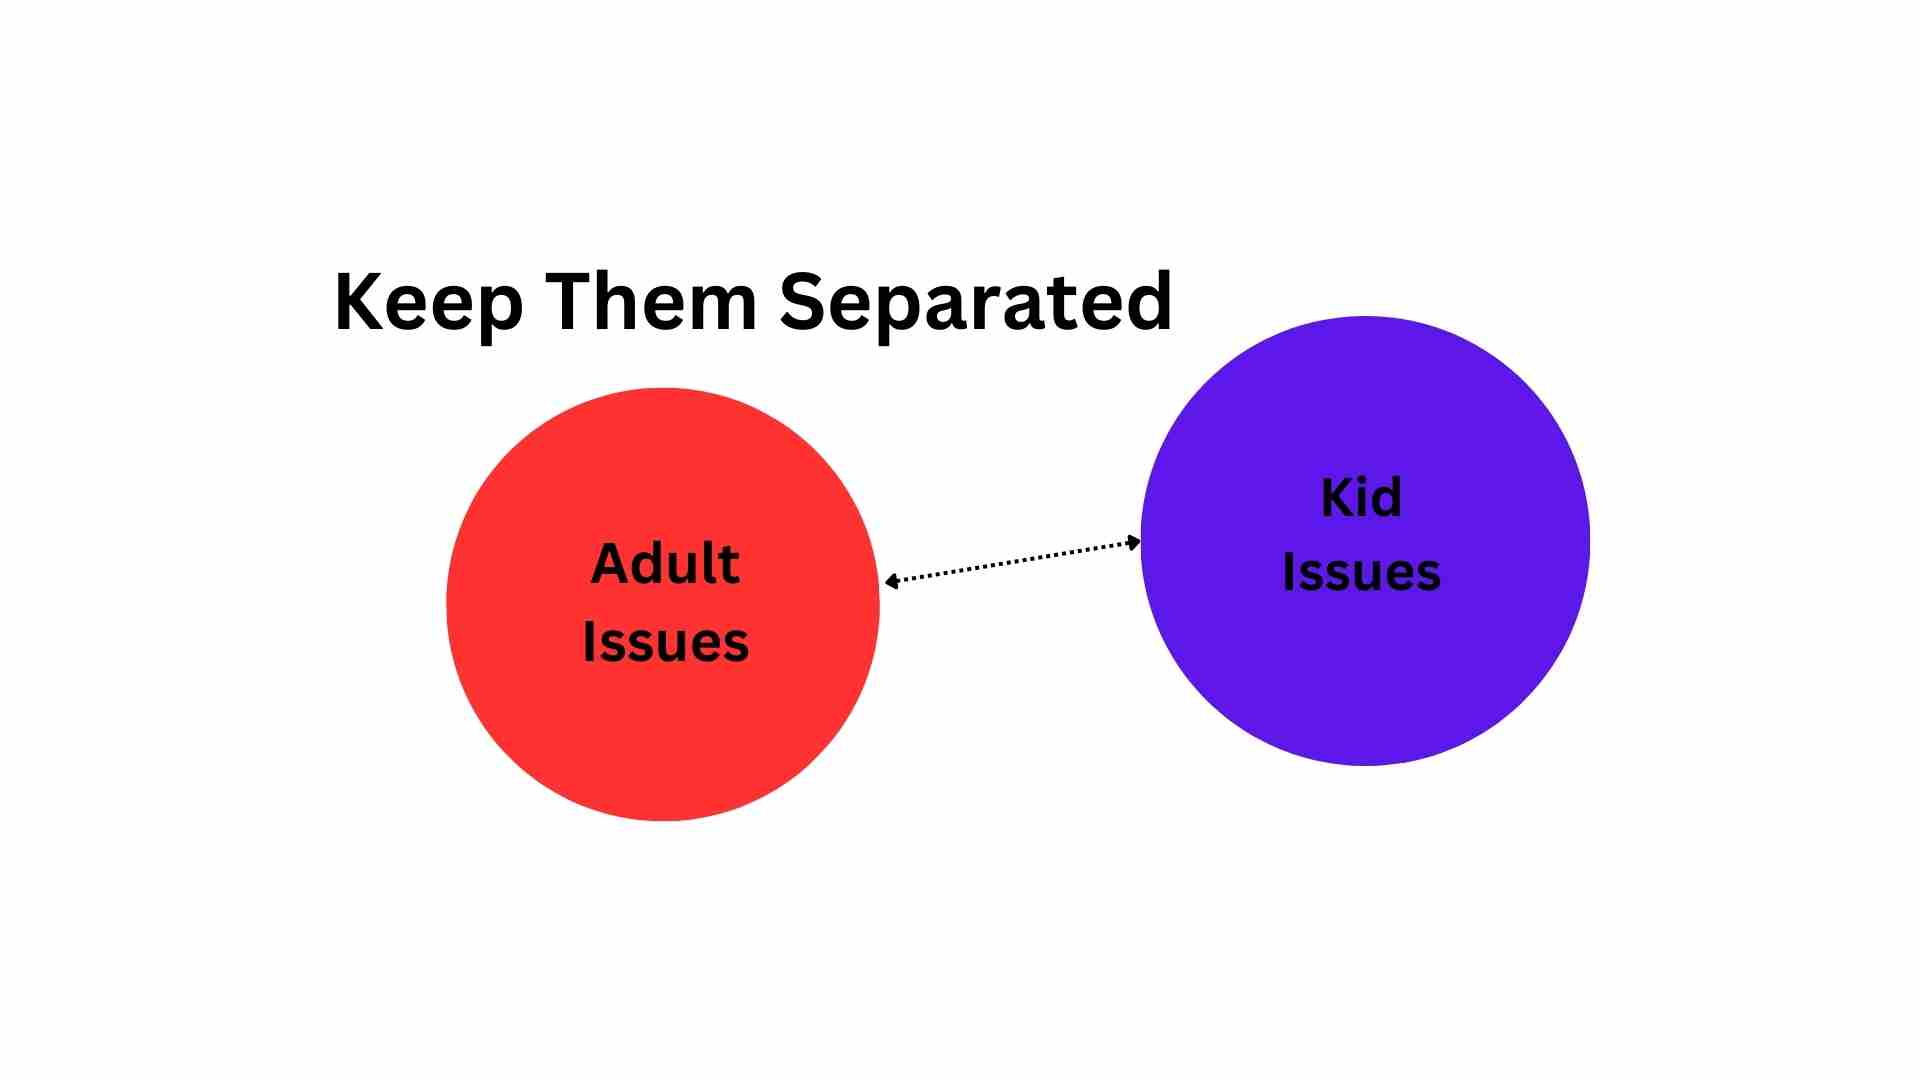 Keep them separated adult issues.